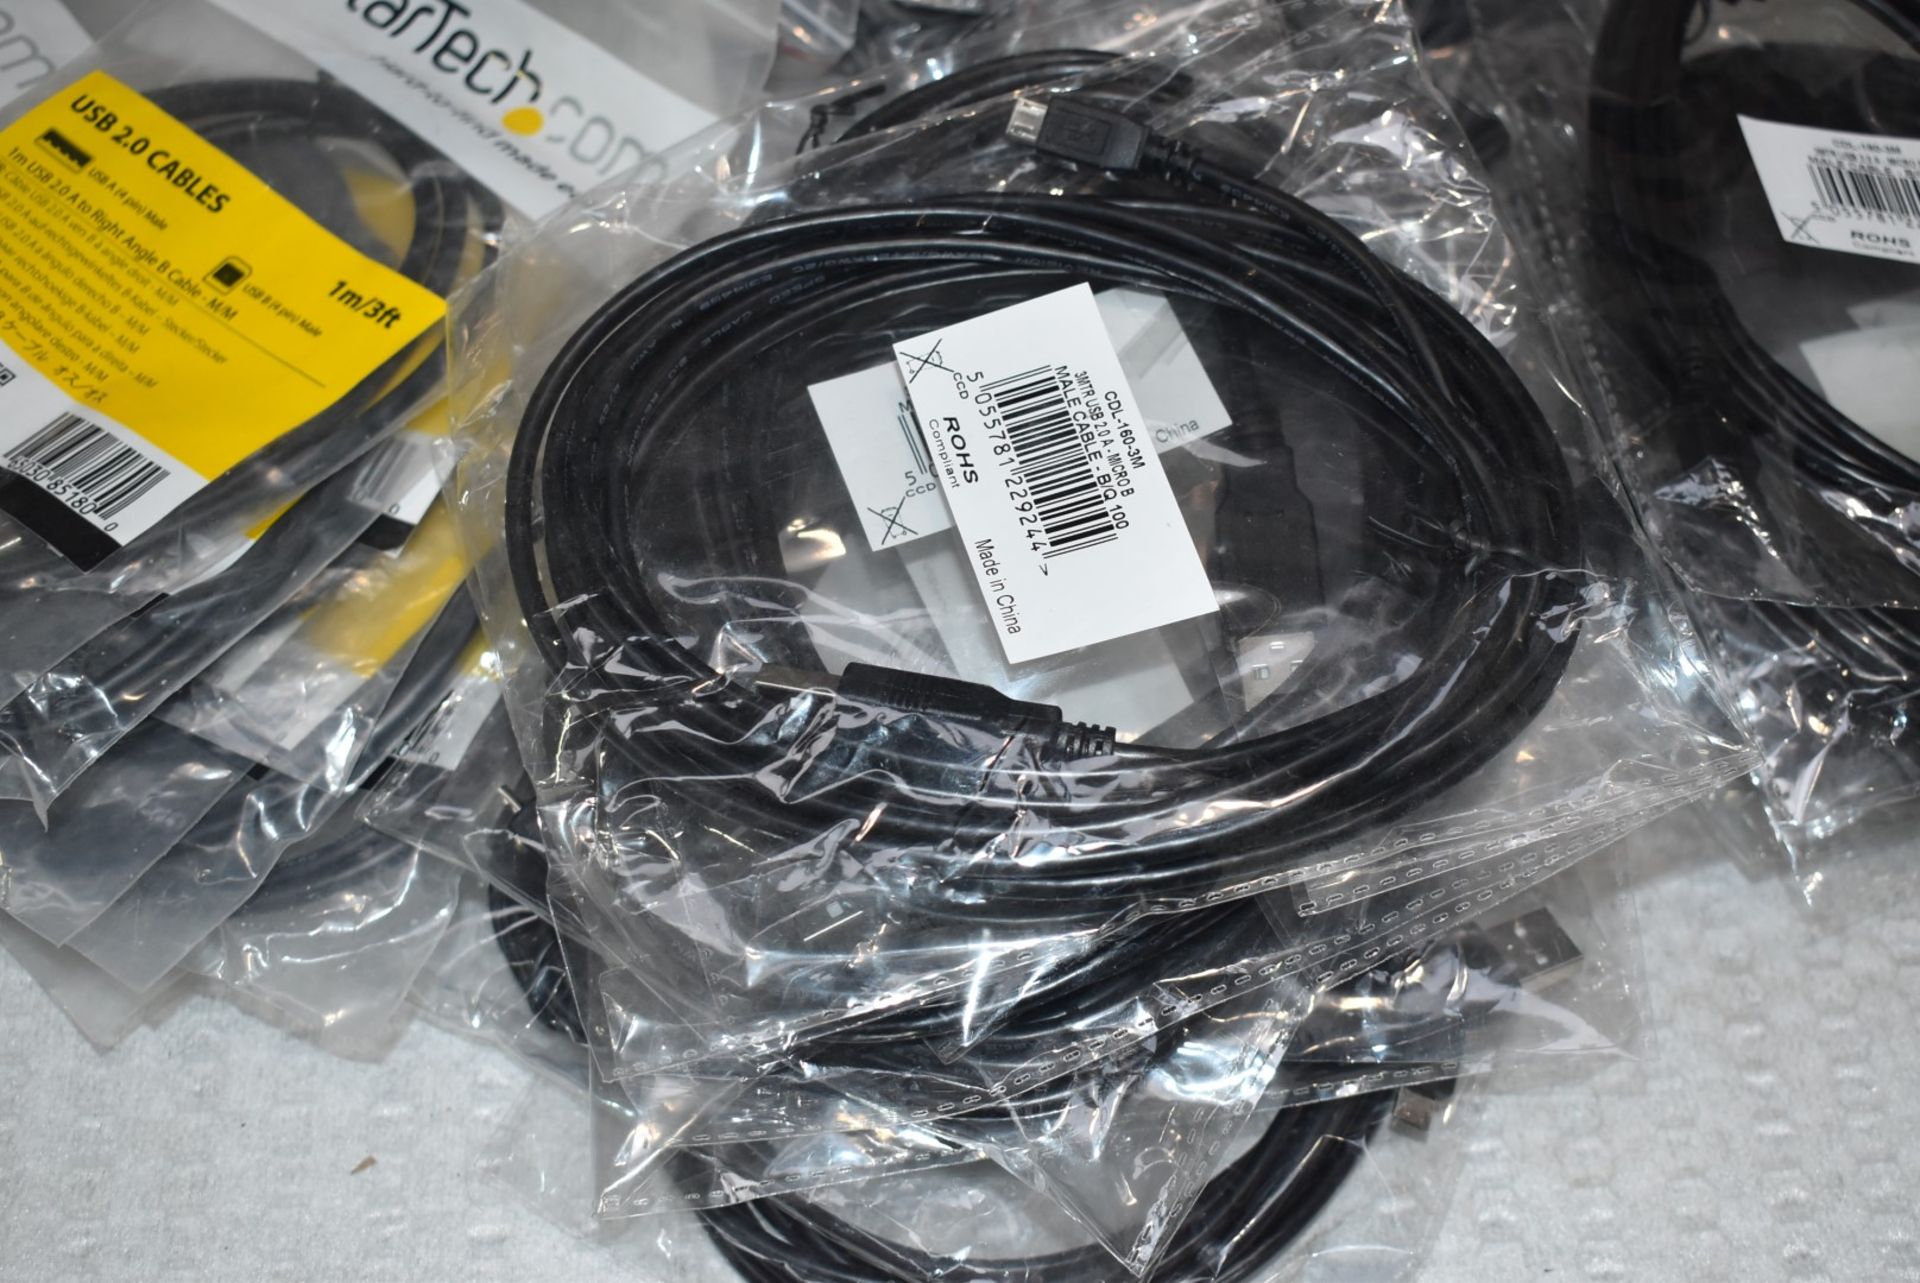 90 x Assorted Cables Including Various USB Connection Leads - New in Packets - Image 17 of 21